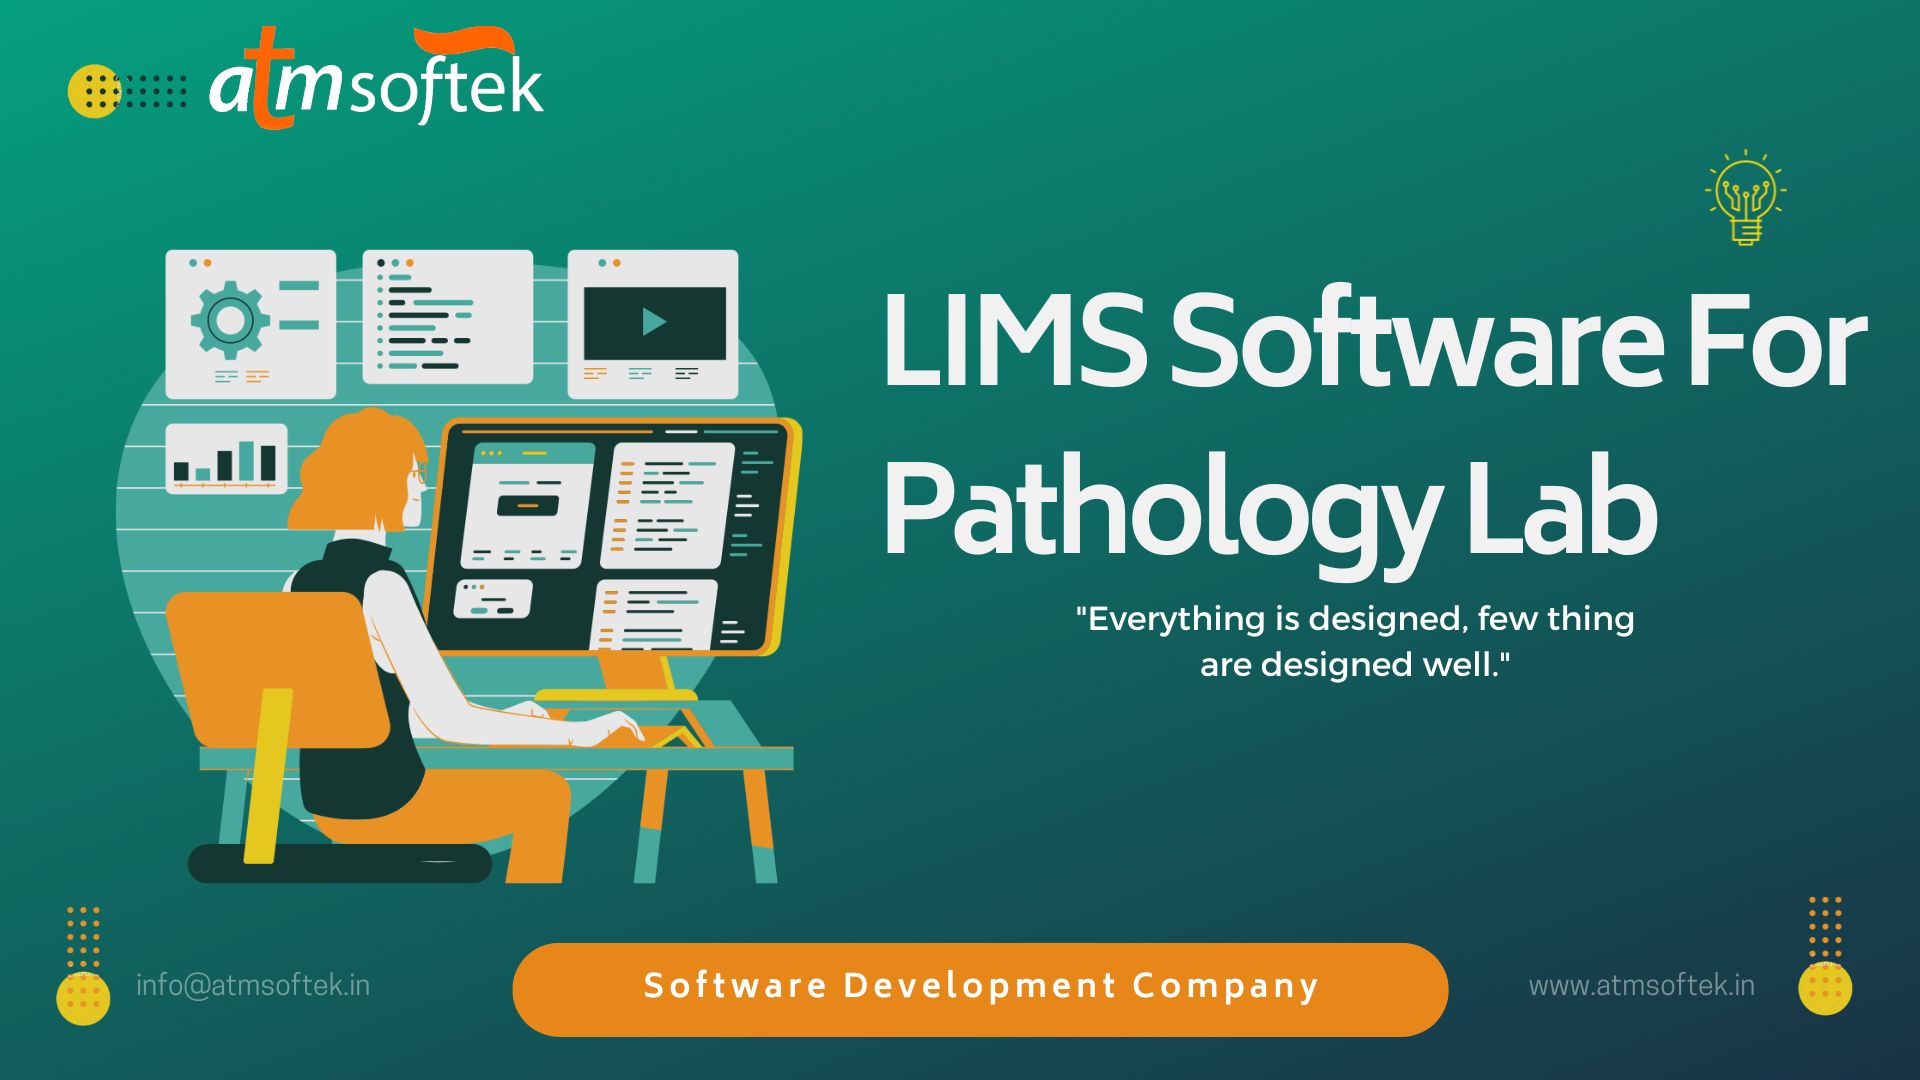 LIMS Software